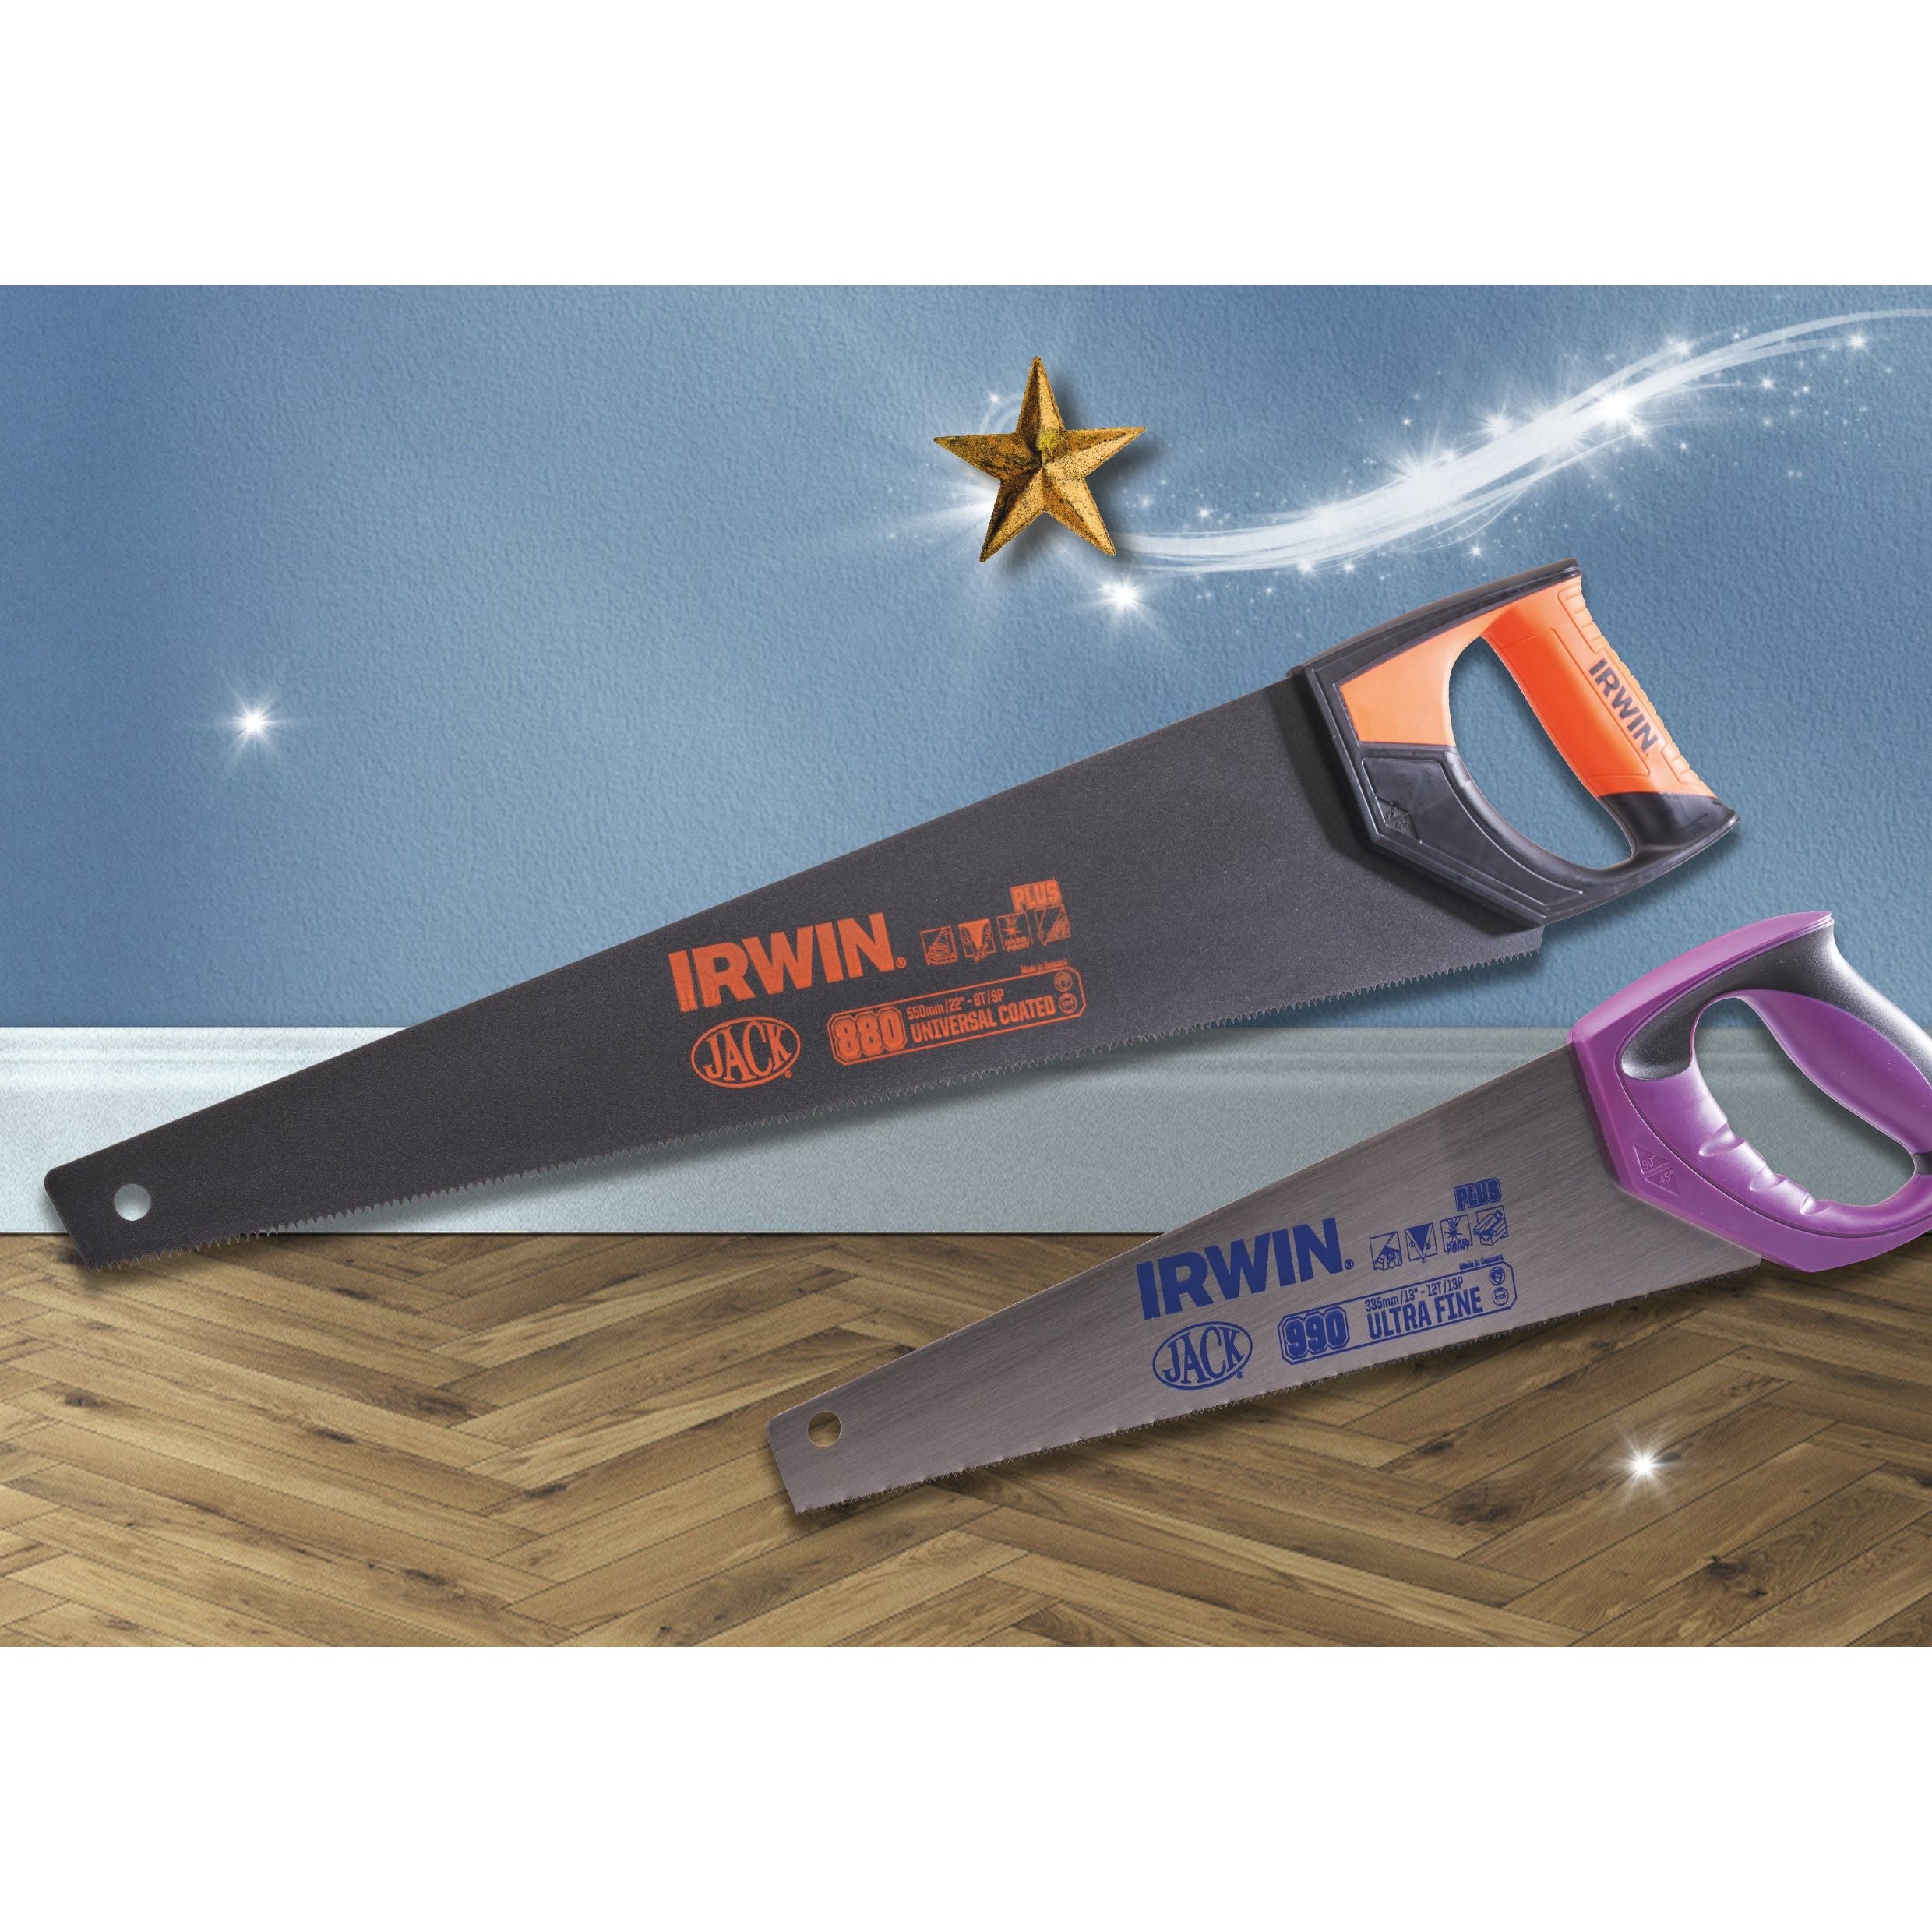 IRWIN Jack 880 Coated Saw with Toolbox Saw